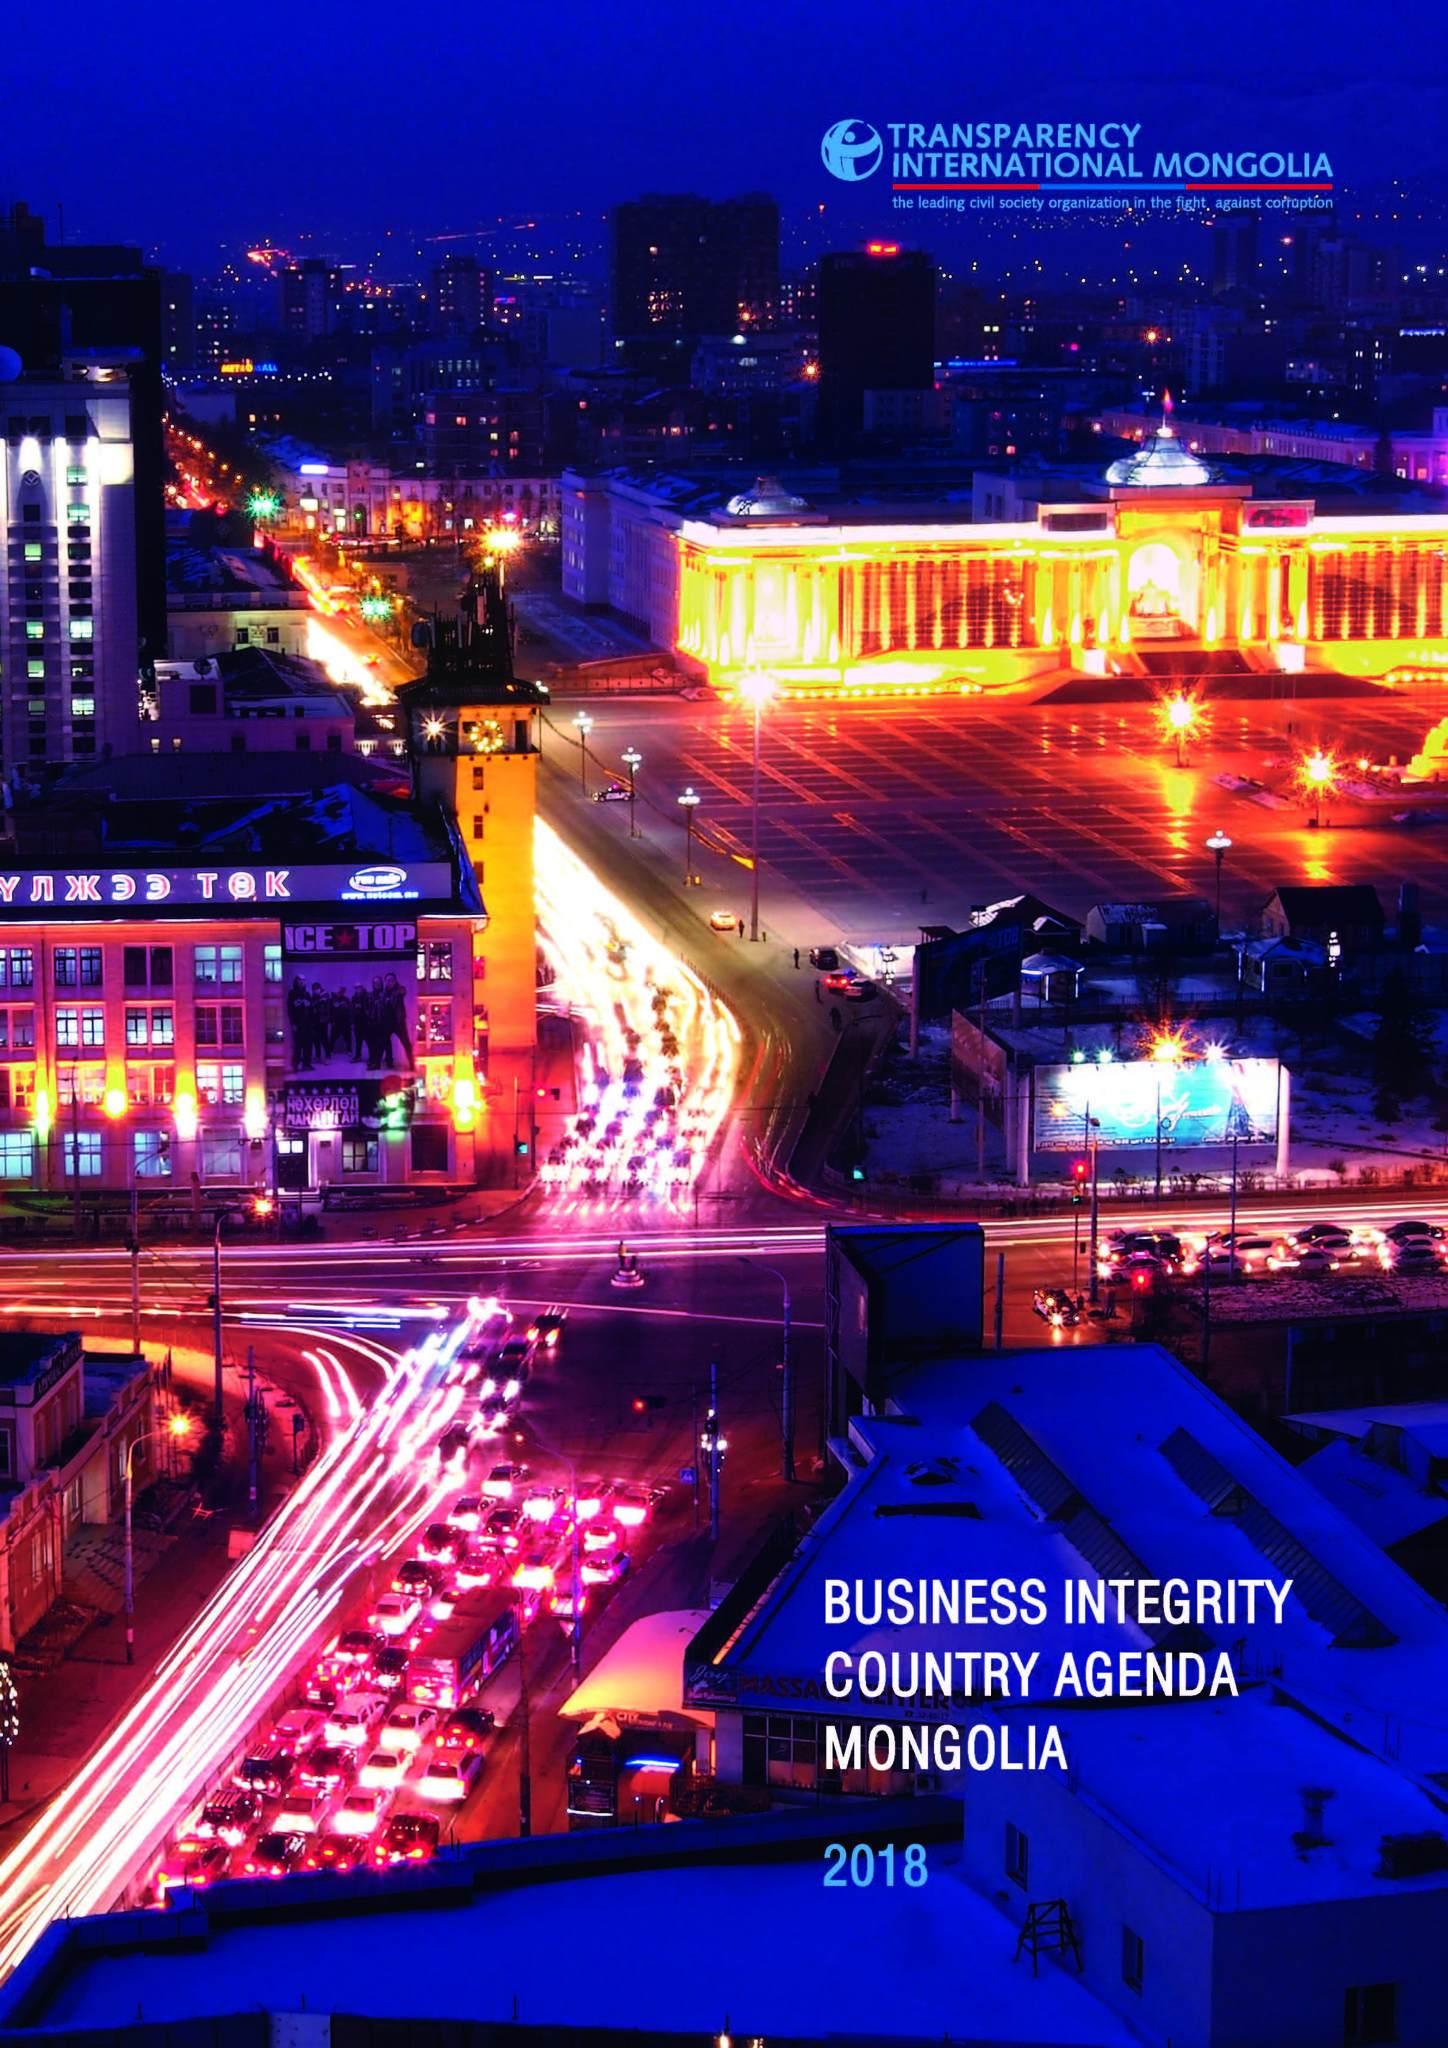 Business integrity country agenda